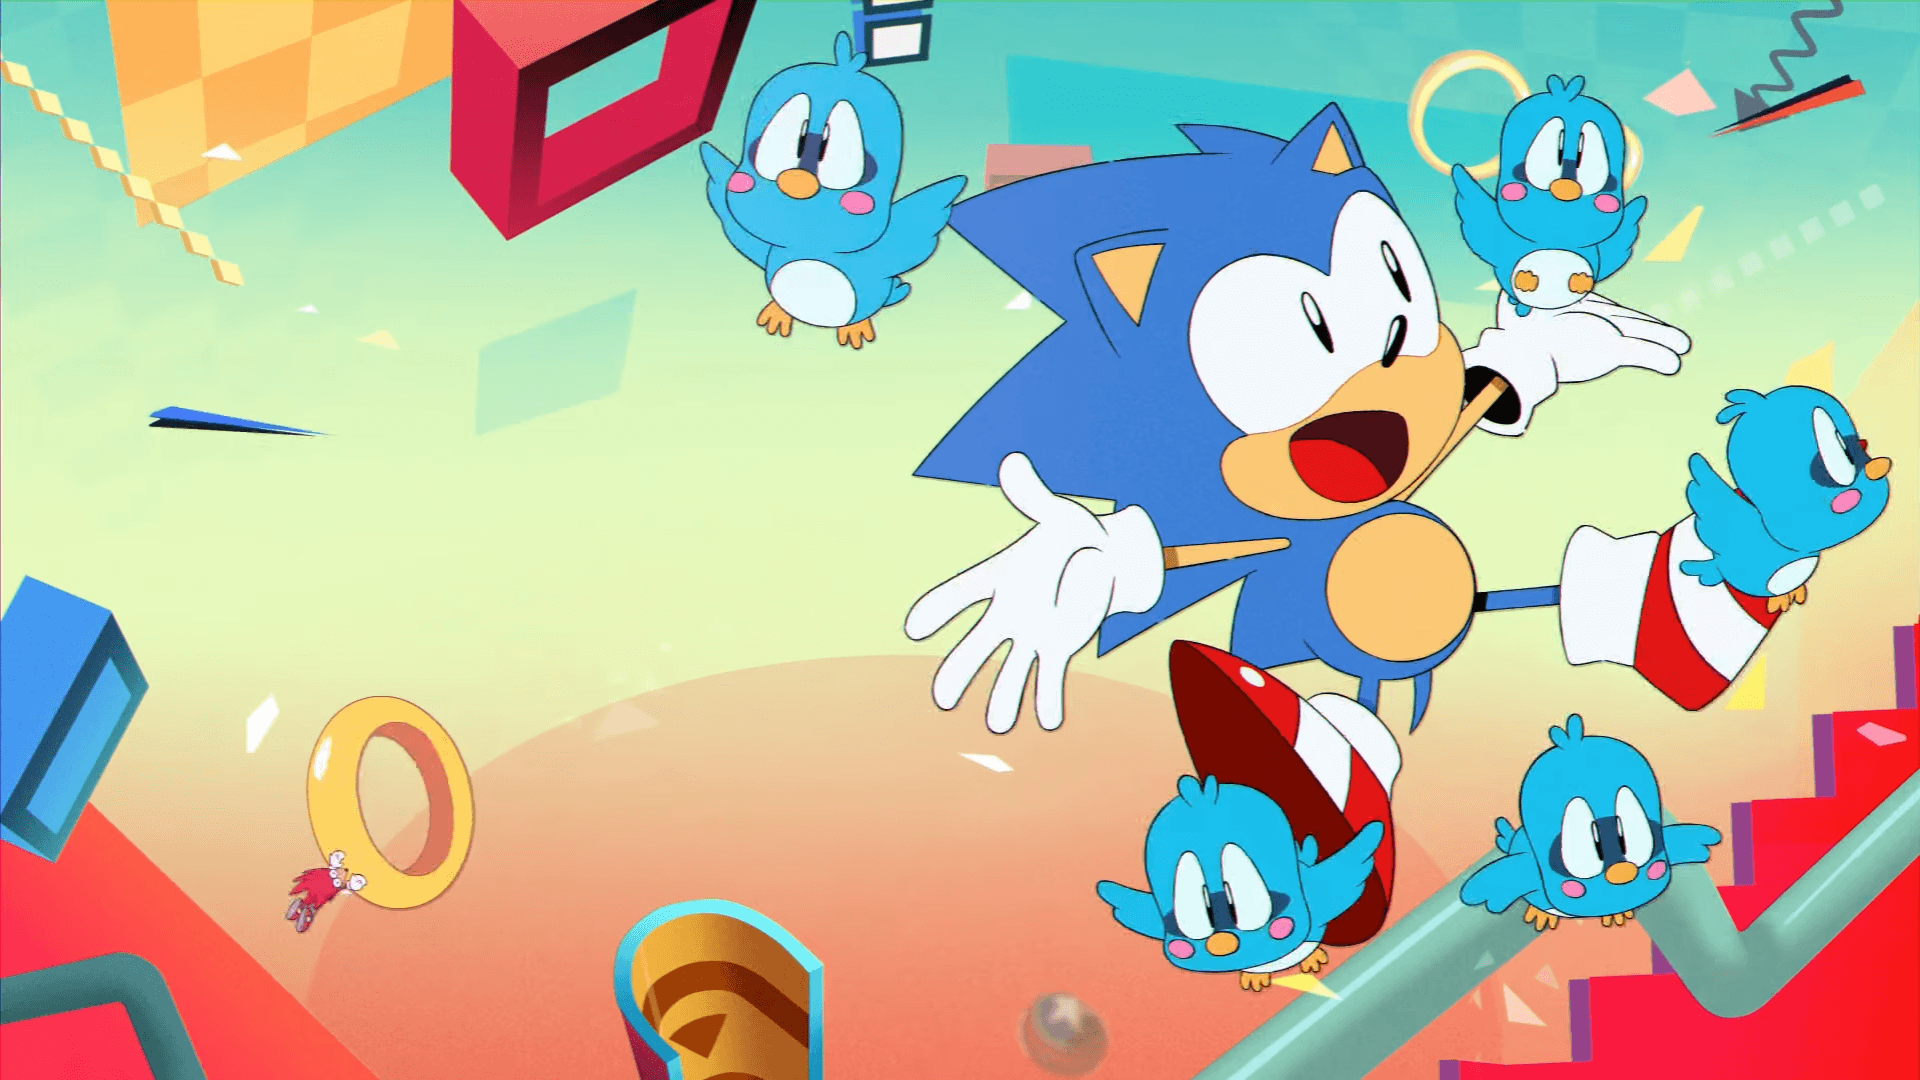 A cool Sonic Mania wallpapers from the opening animation[1920 x